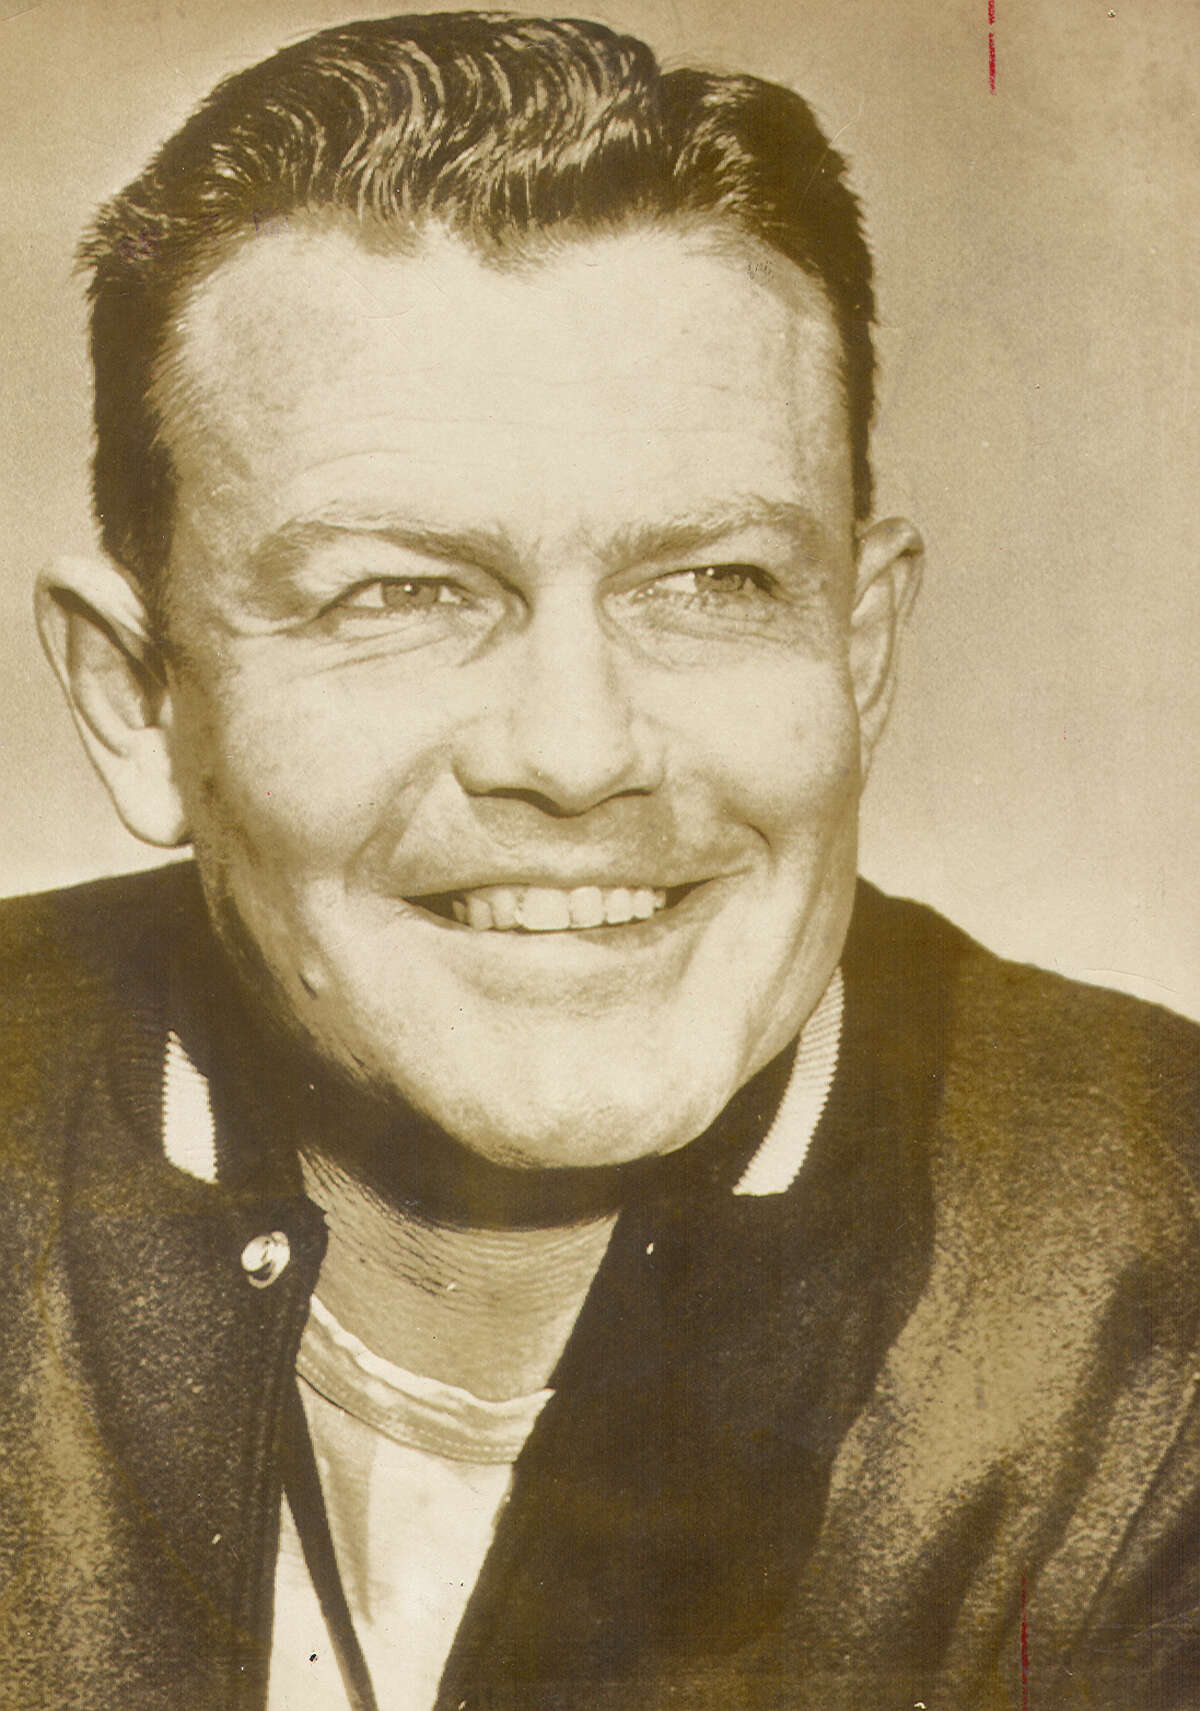 Dec. 18, 1956 ... Darrell Royal was appointed the new head football coach at the University of Texas. In this picture, he was the coach at the University of Washington.